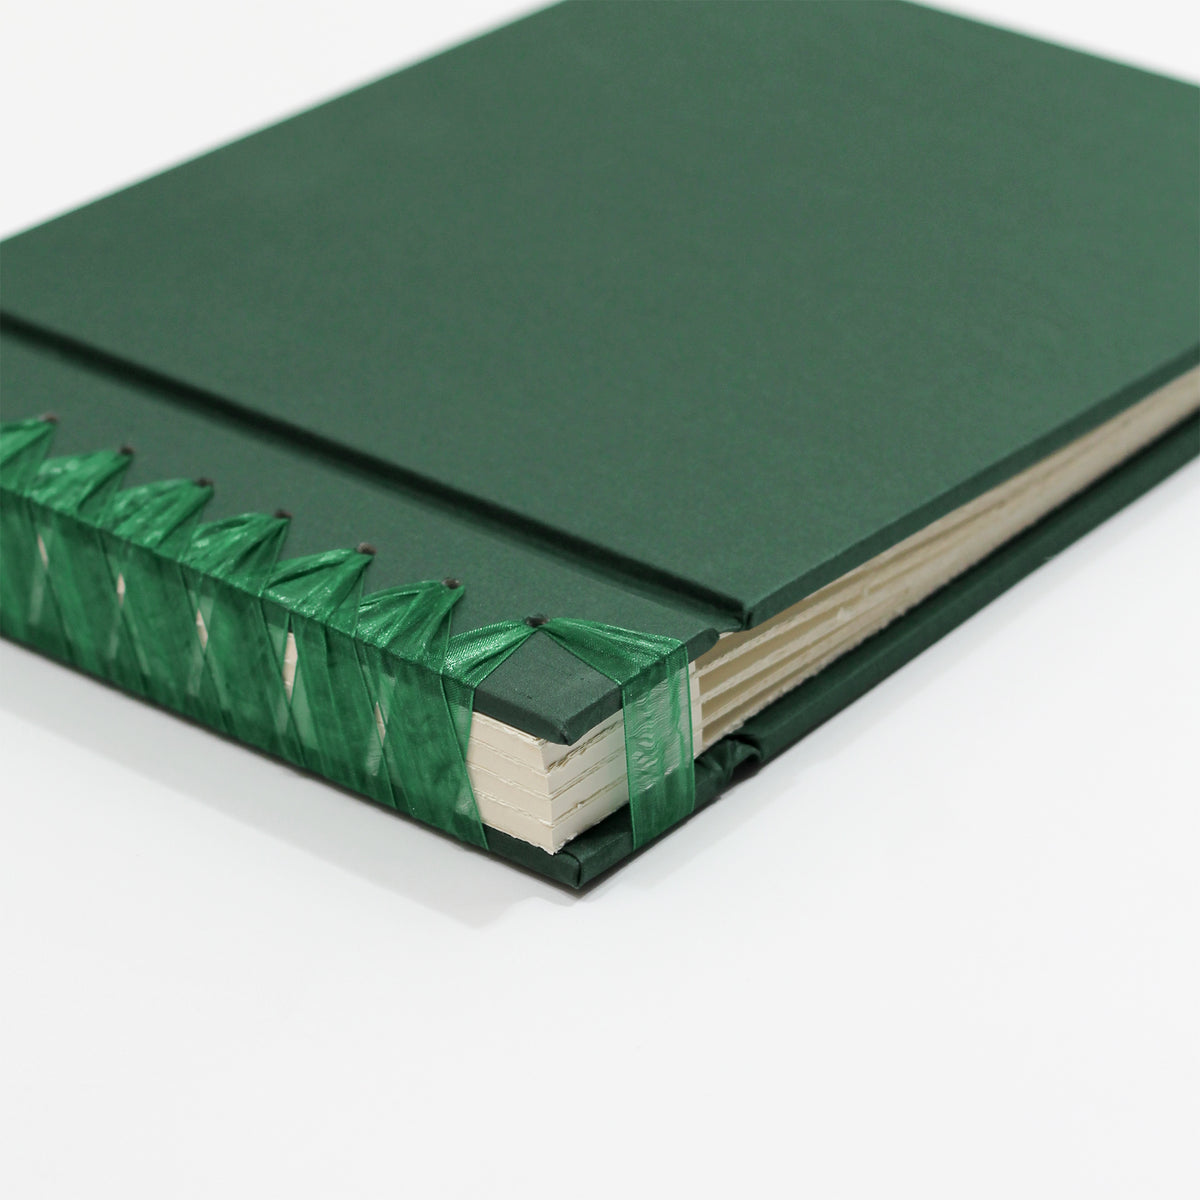 Deluxe 12 x 15 Paper Page Album | Cover: Emerald Silk | Available Personalized